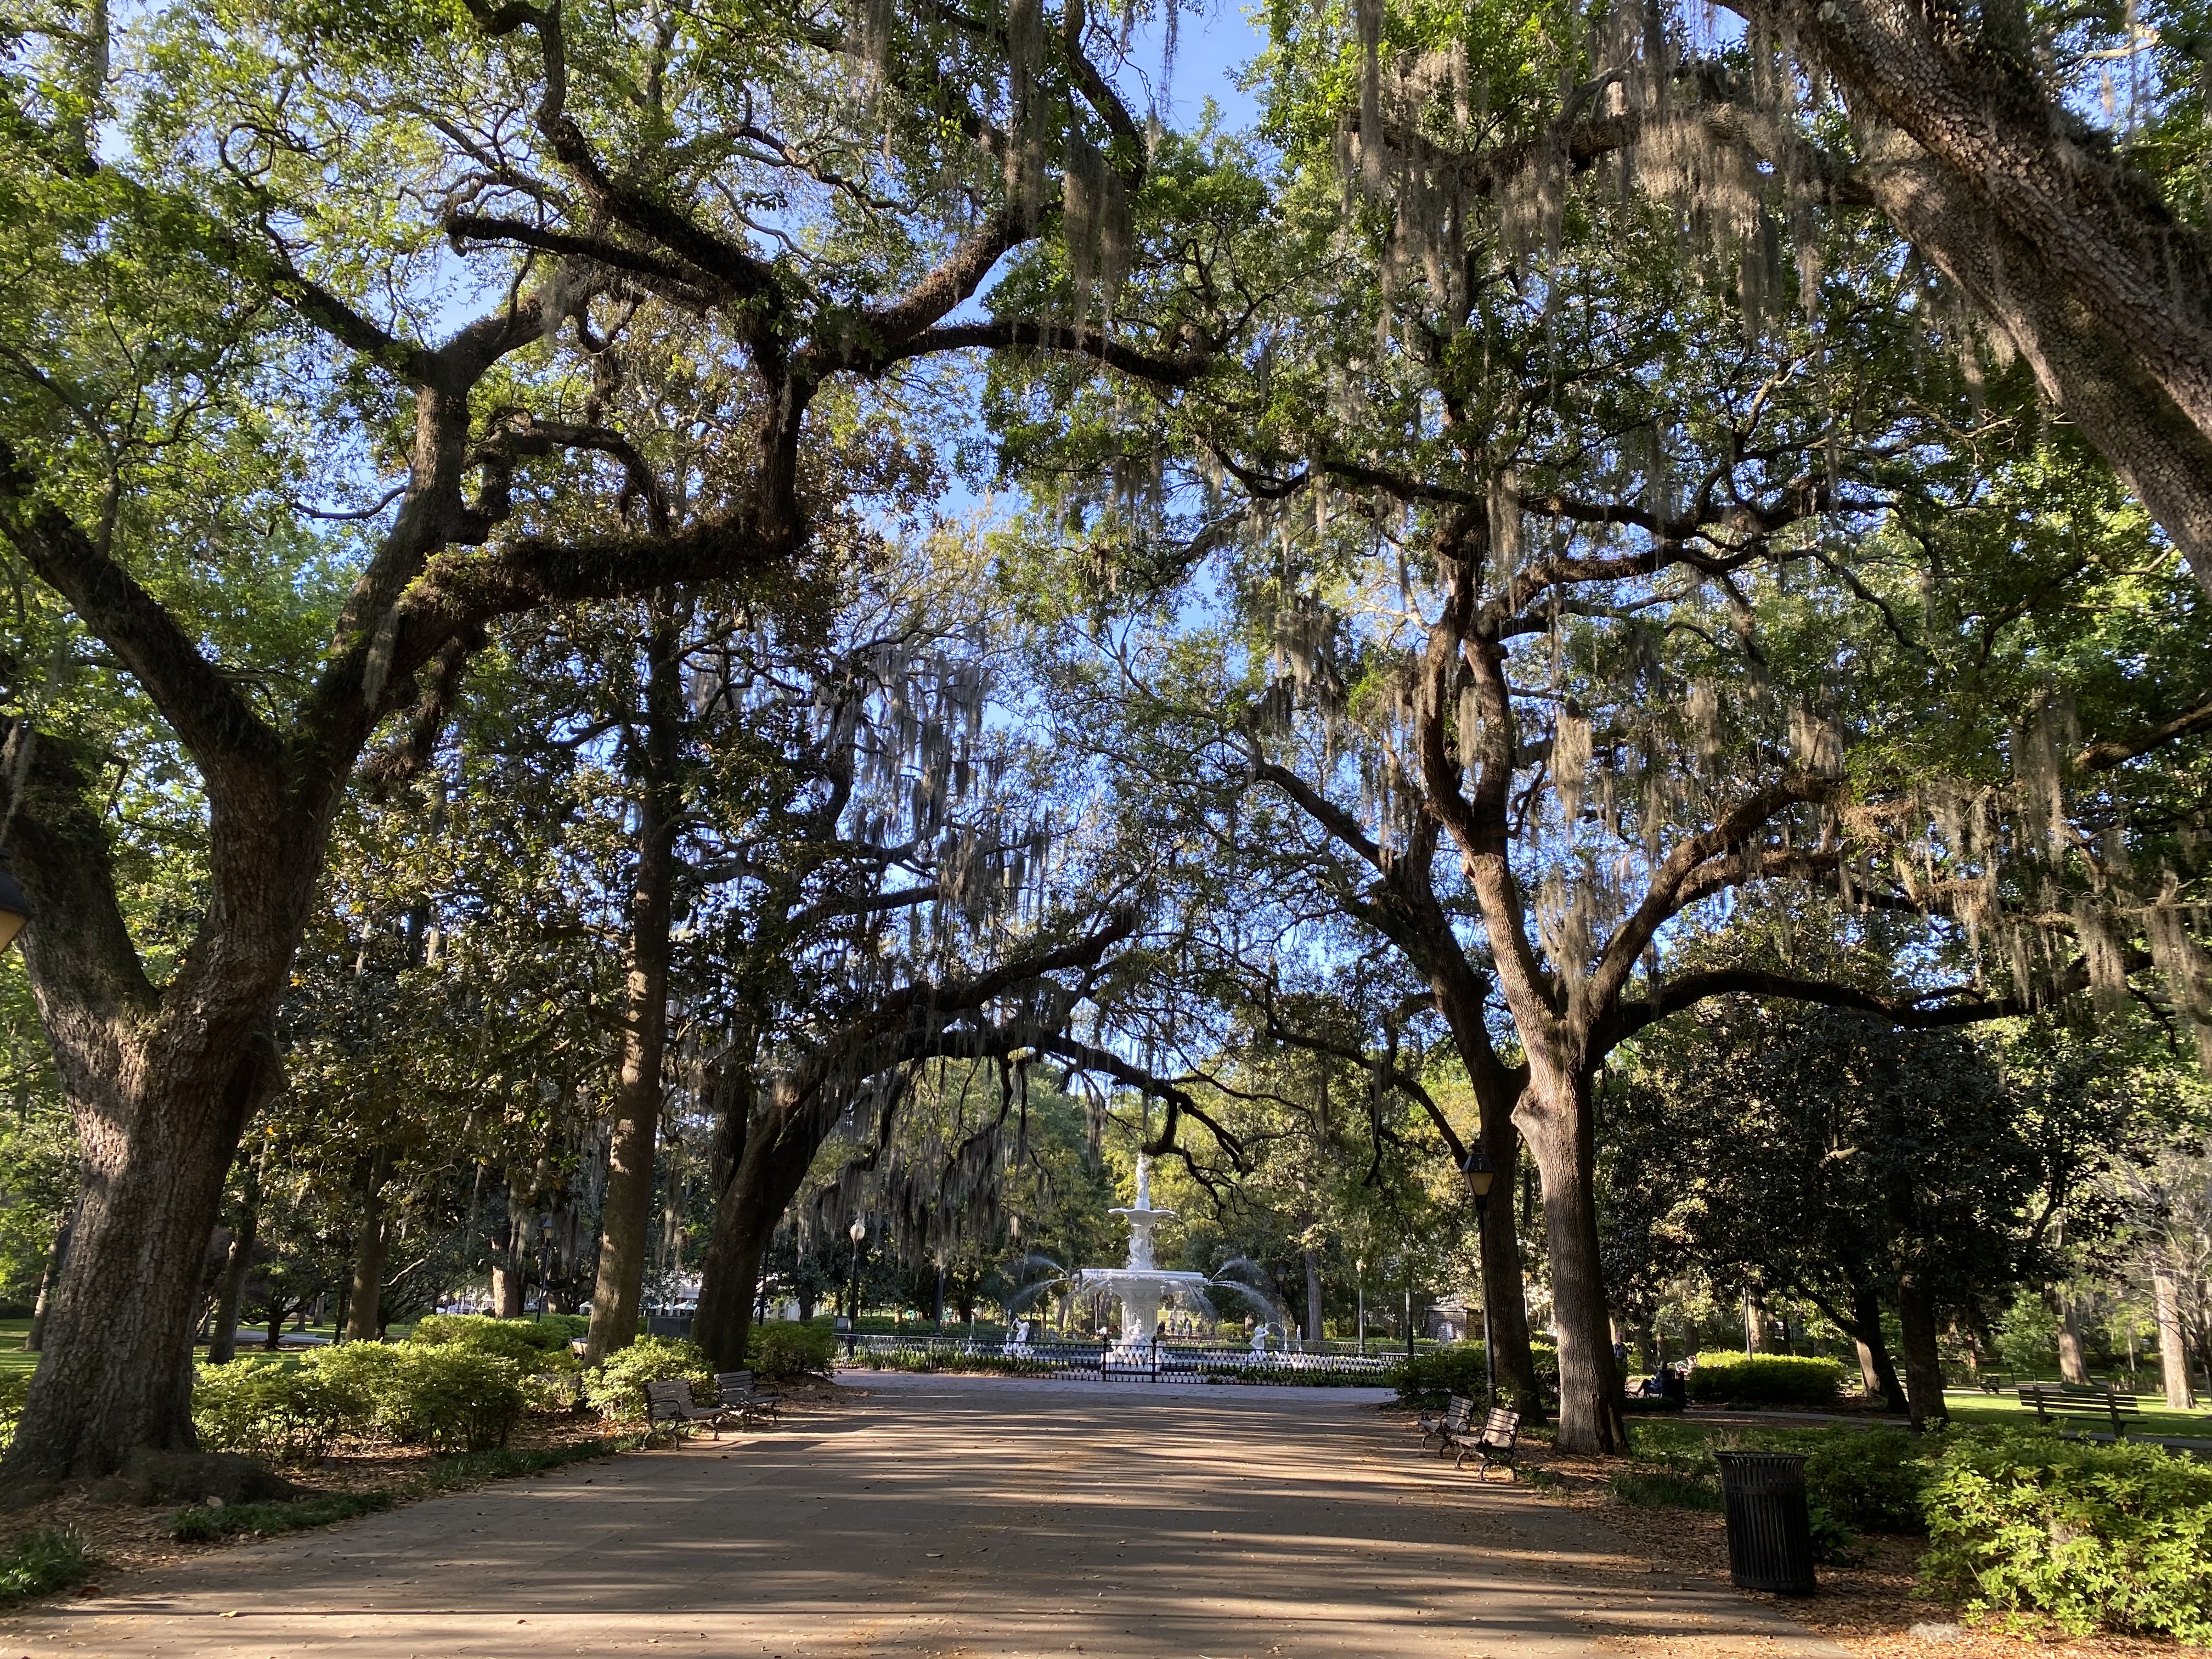 Head-on view of the middle of Forsyth Park in Savannah, GA, including the fountain in the middle and trees along both sides of the main walkway.